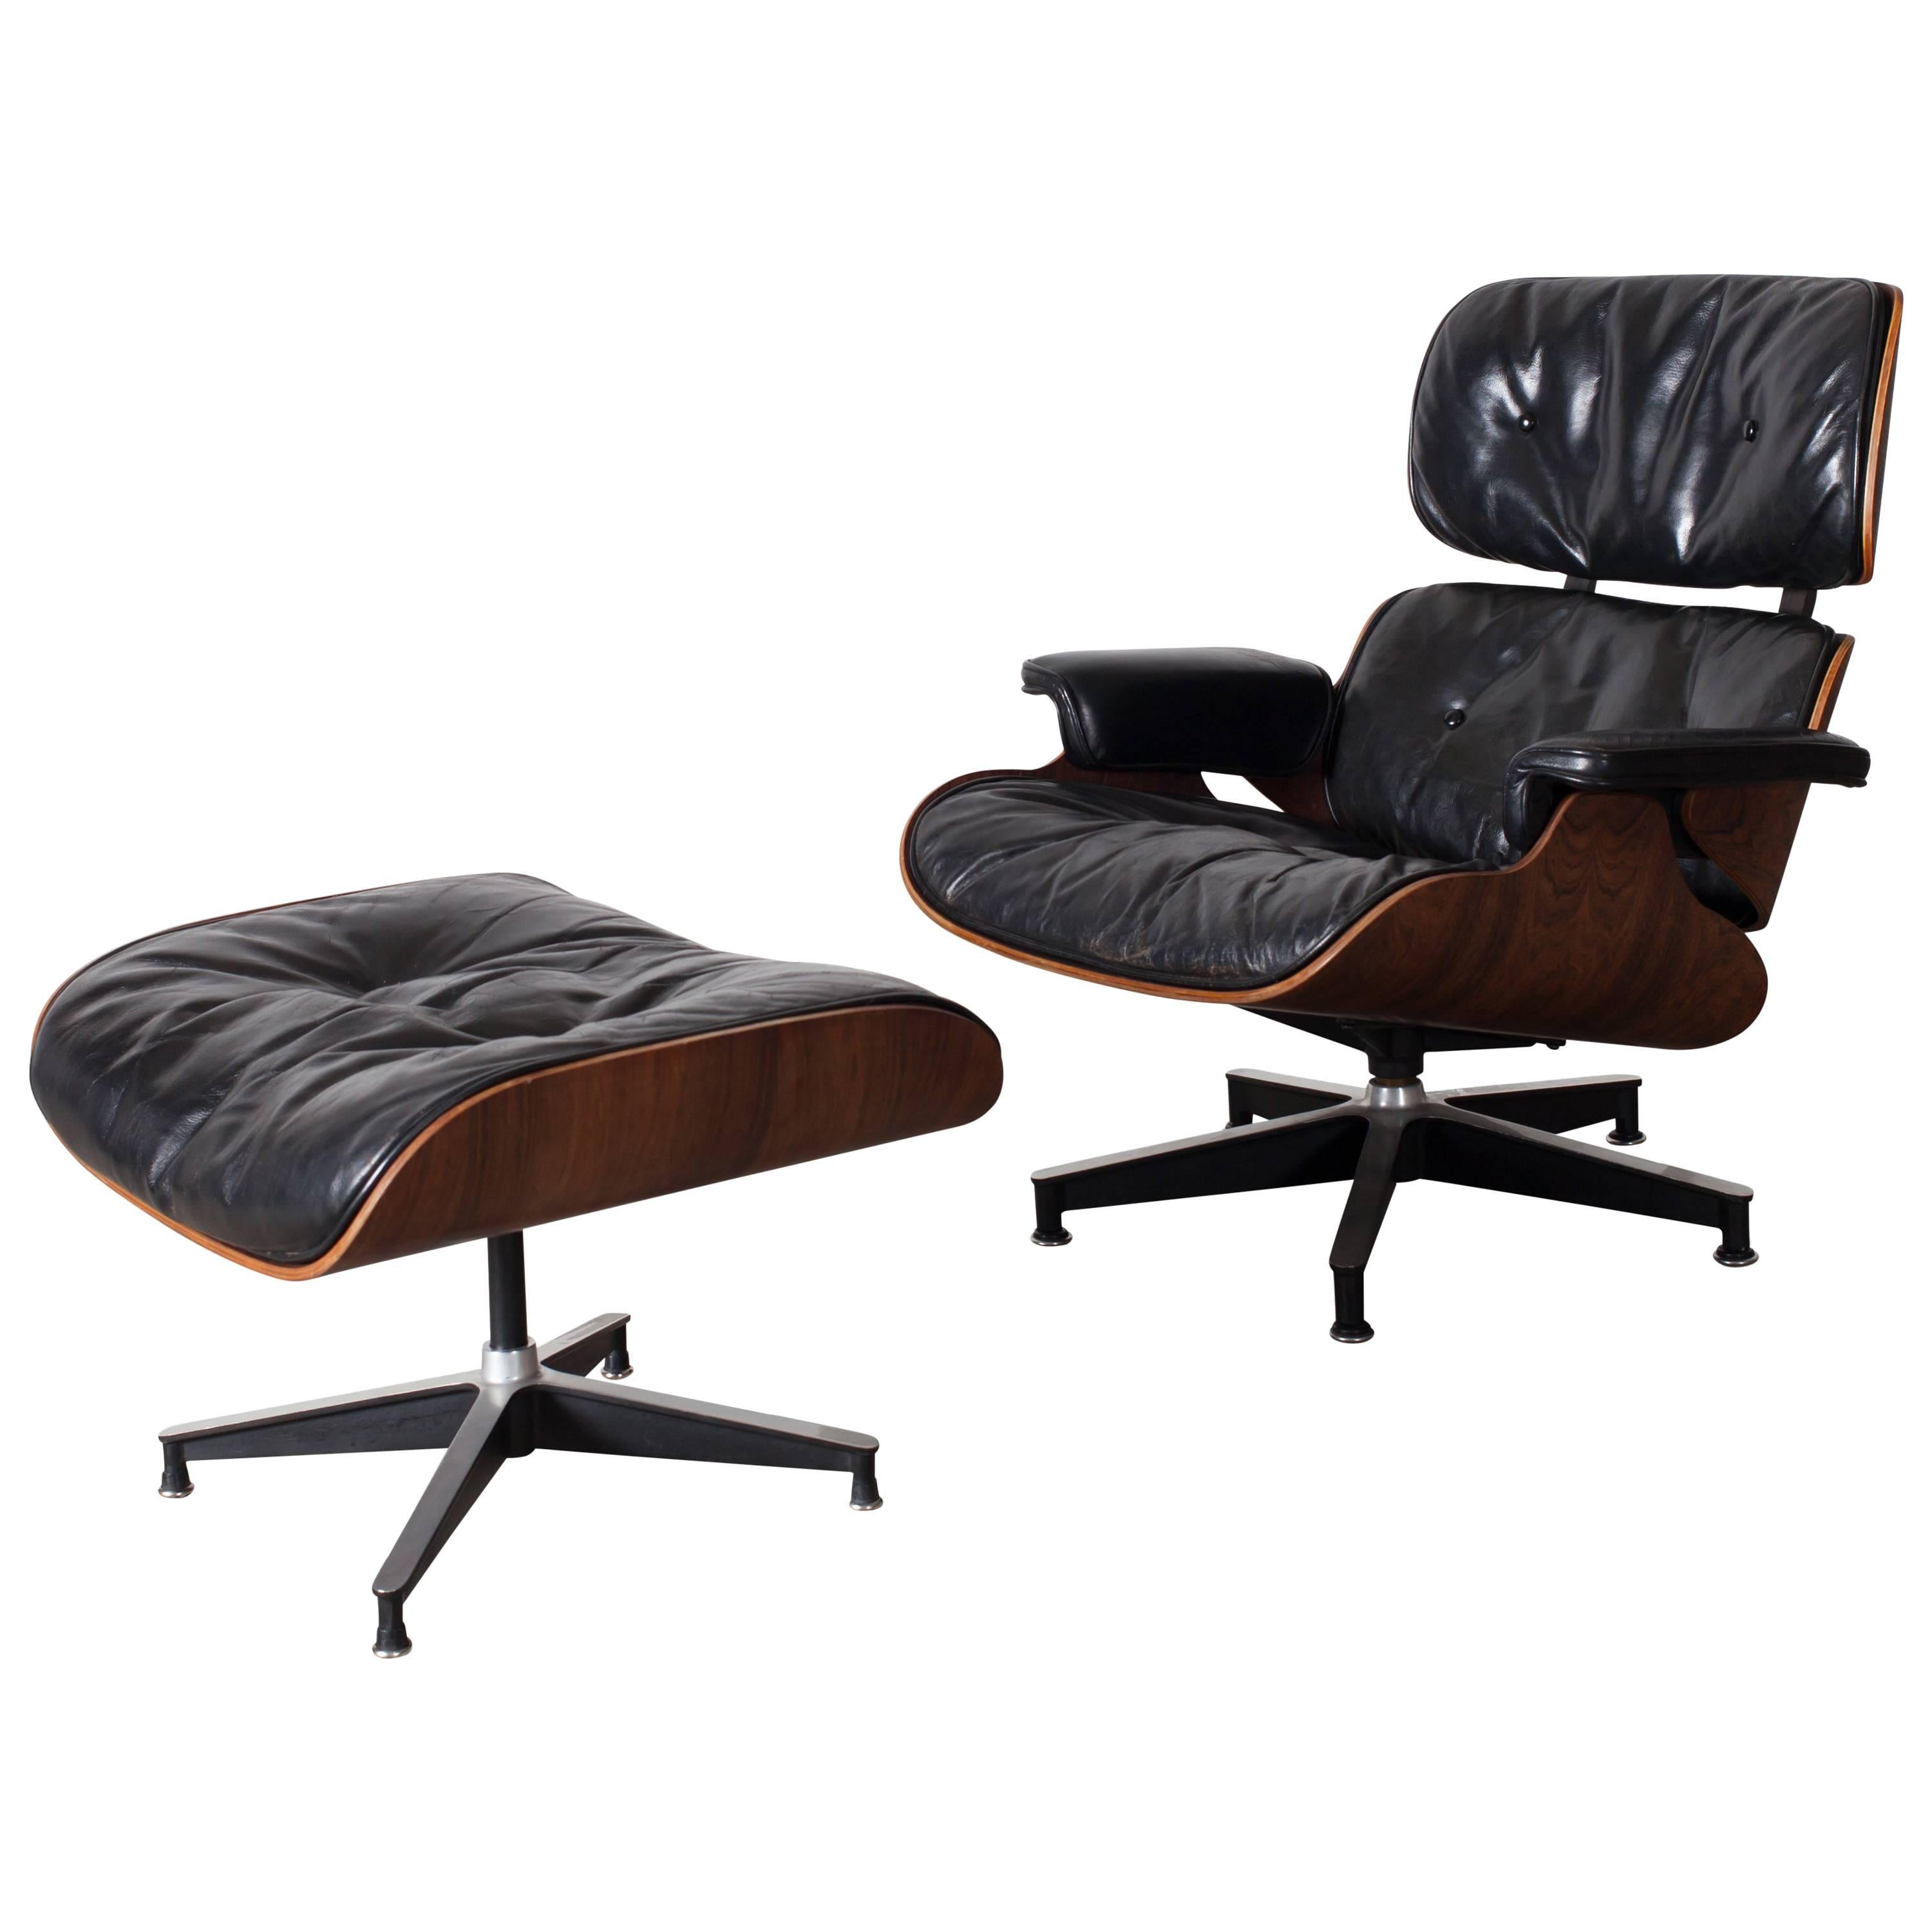 Eames Lounge Chair & Ottoman - 1st Edition